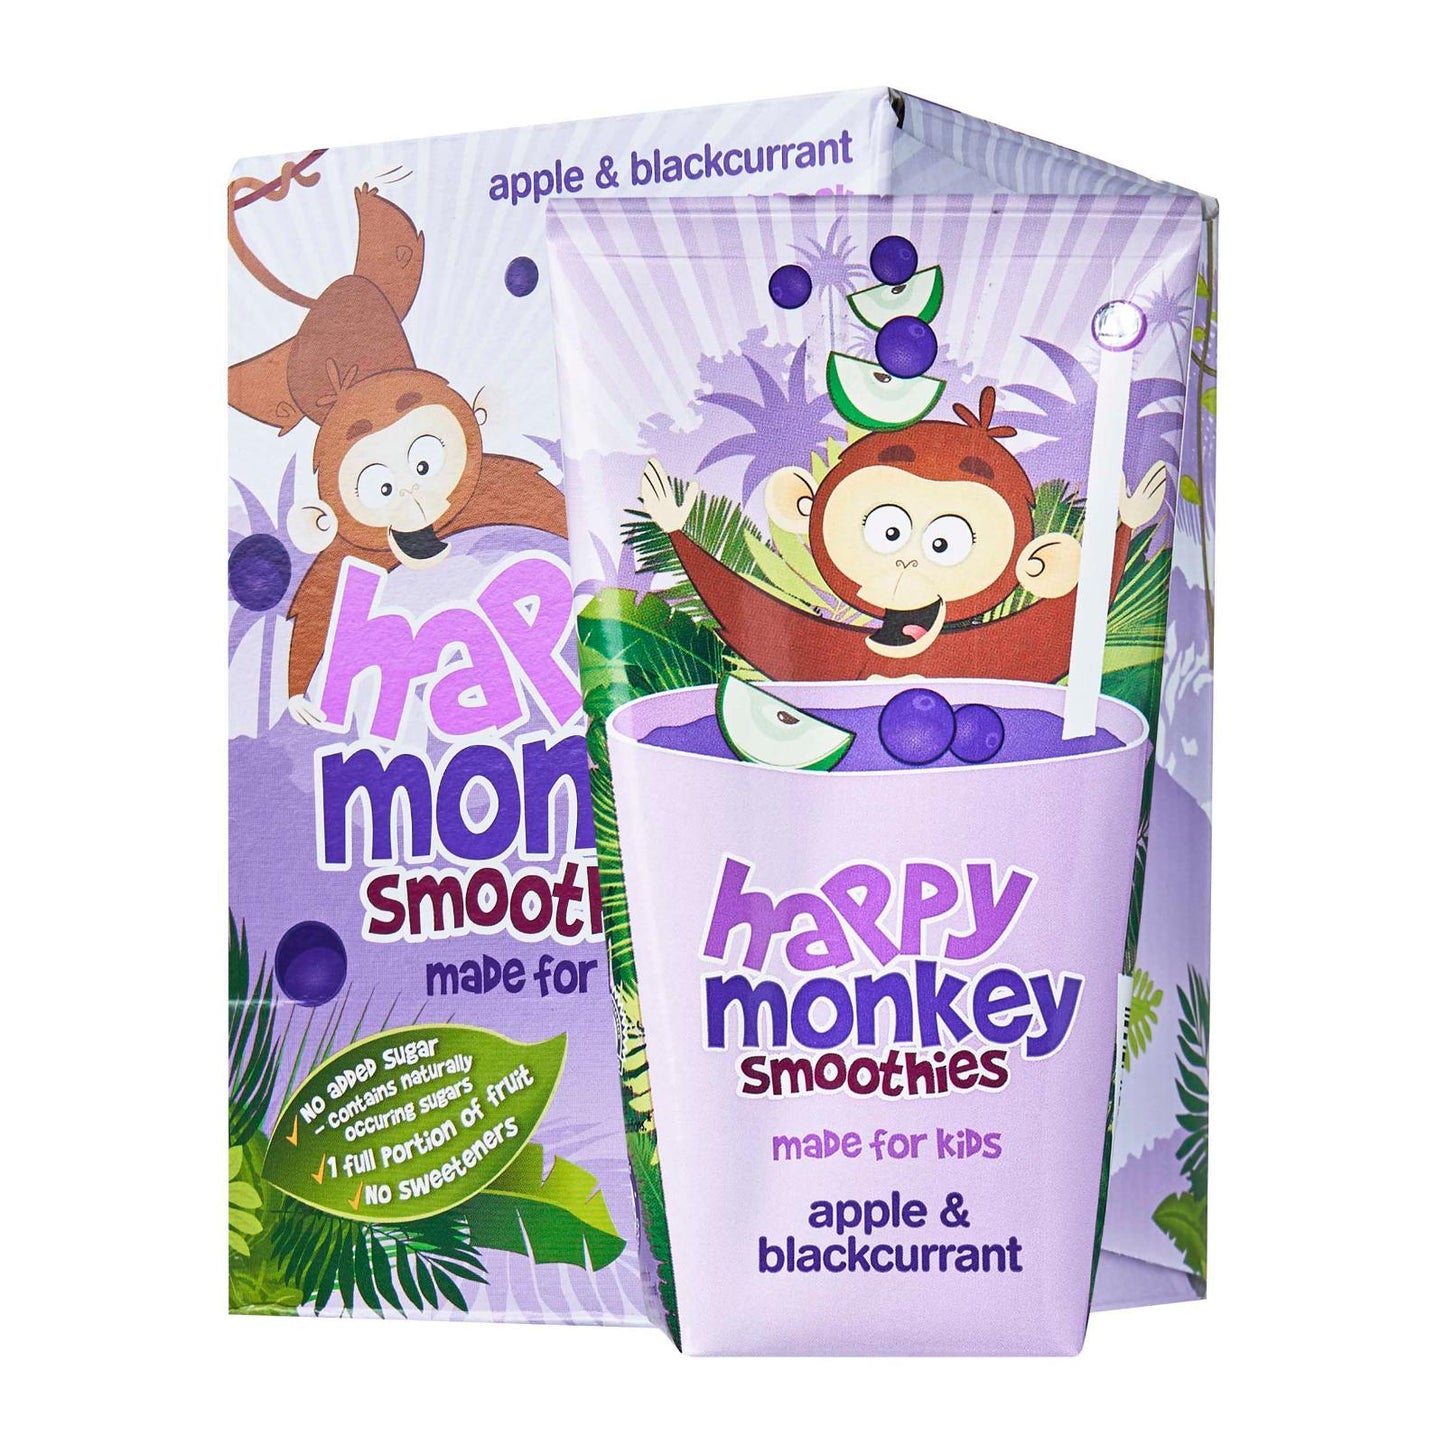 Happy Monkey Apple and Blackcurrant Smoothies